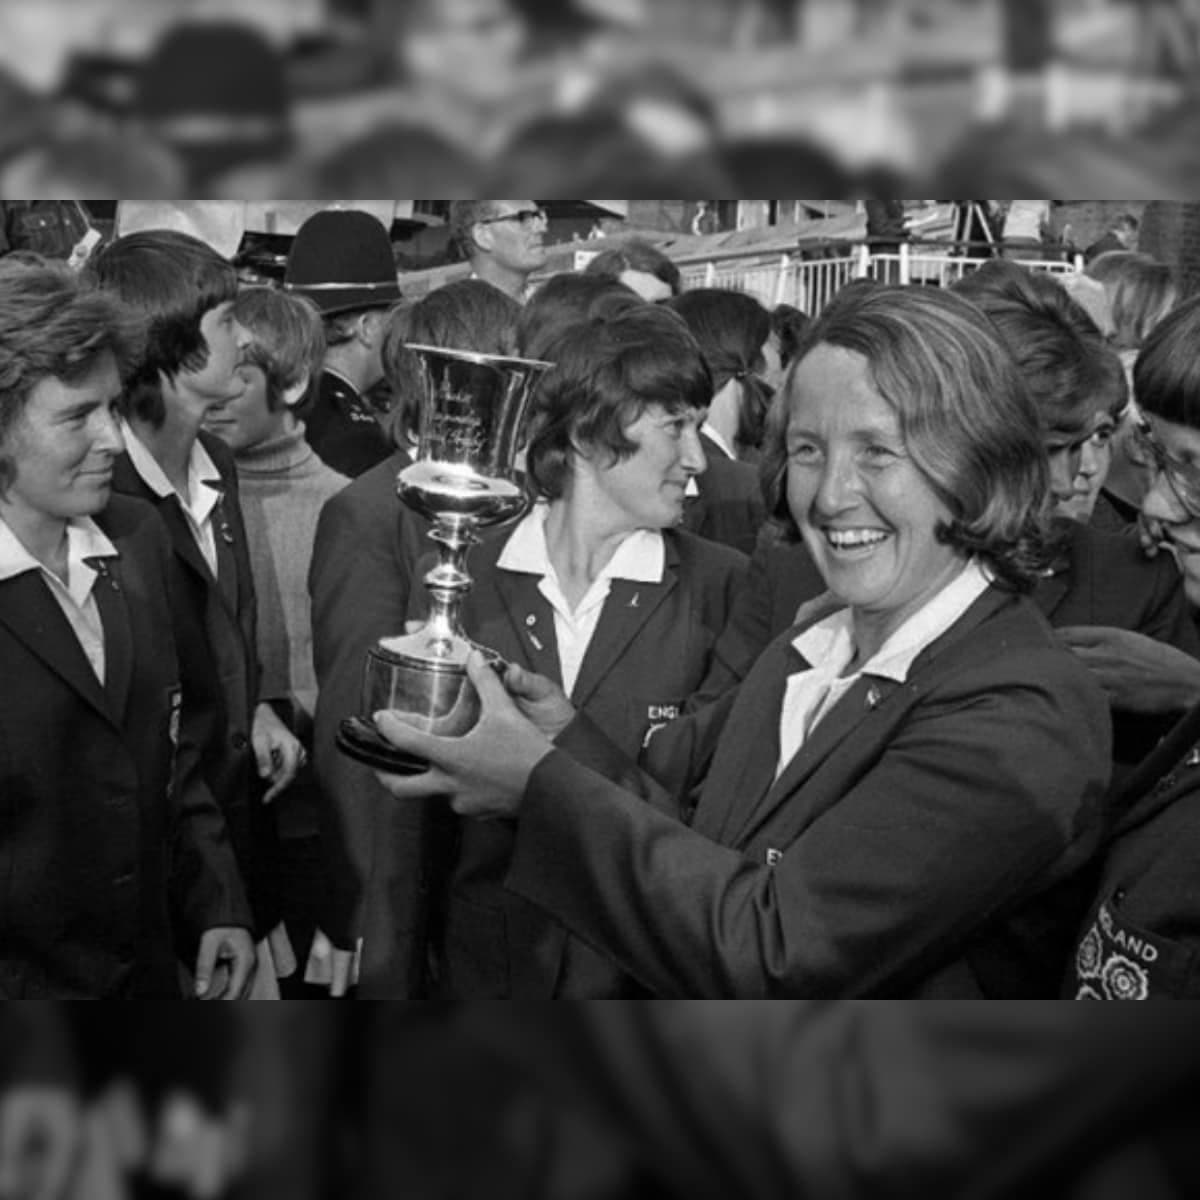  England team won the first Women's World Cup in 1973